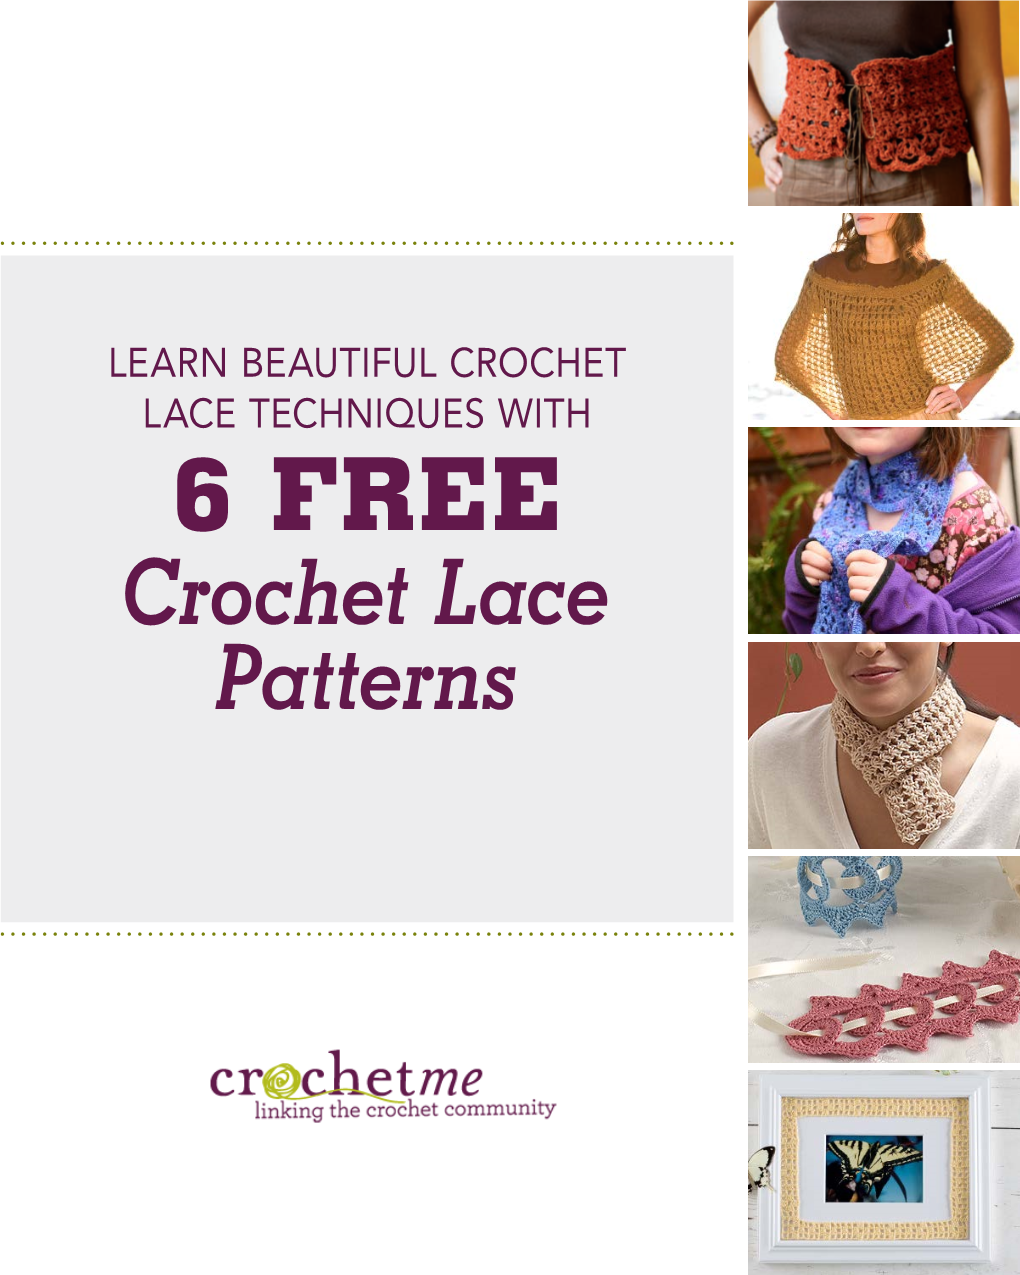 Learn Beautiful Crochet Lace Techniques with 6 FREE Crochet Lace Patterns Learn Beautiful Crochet Lace Techniques with 6 Freecrochet Lace Patterns